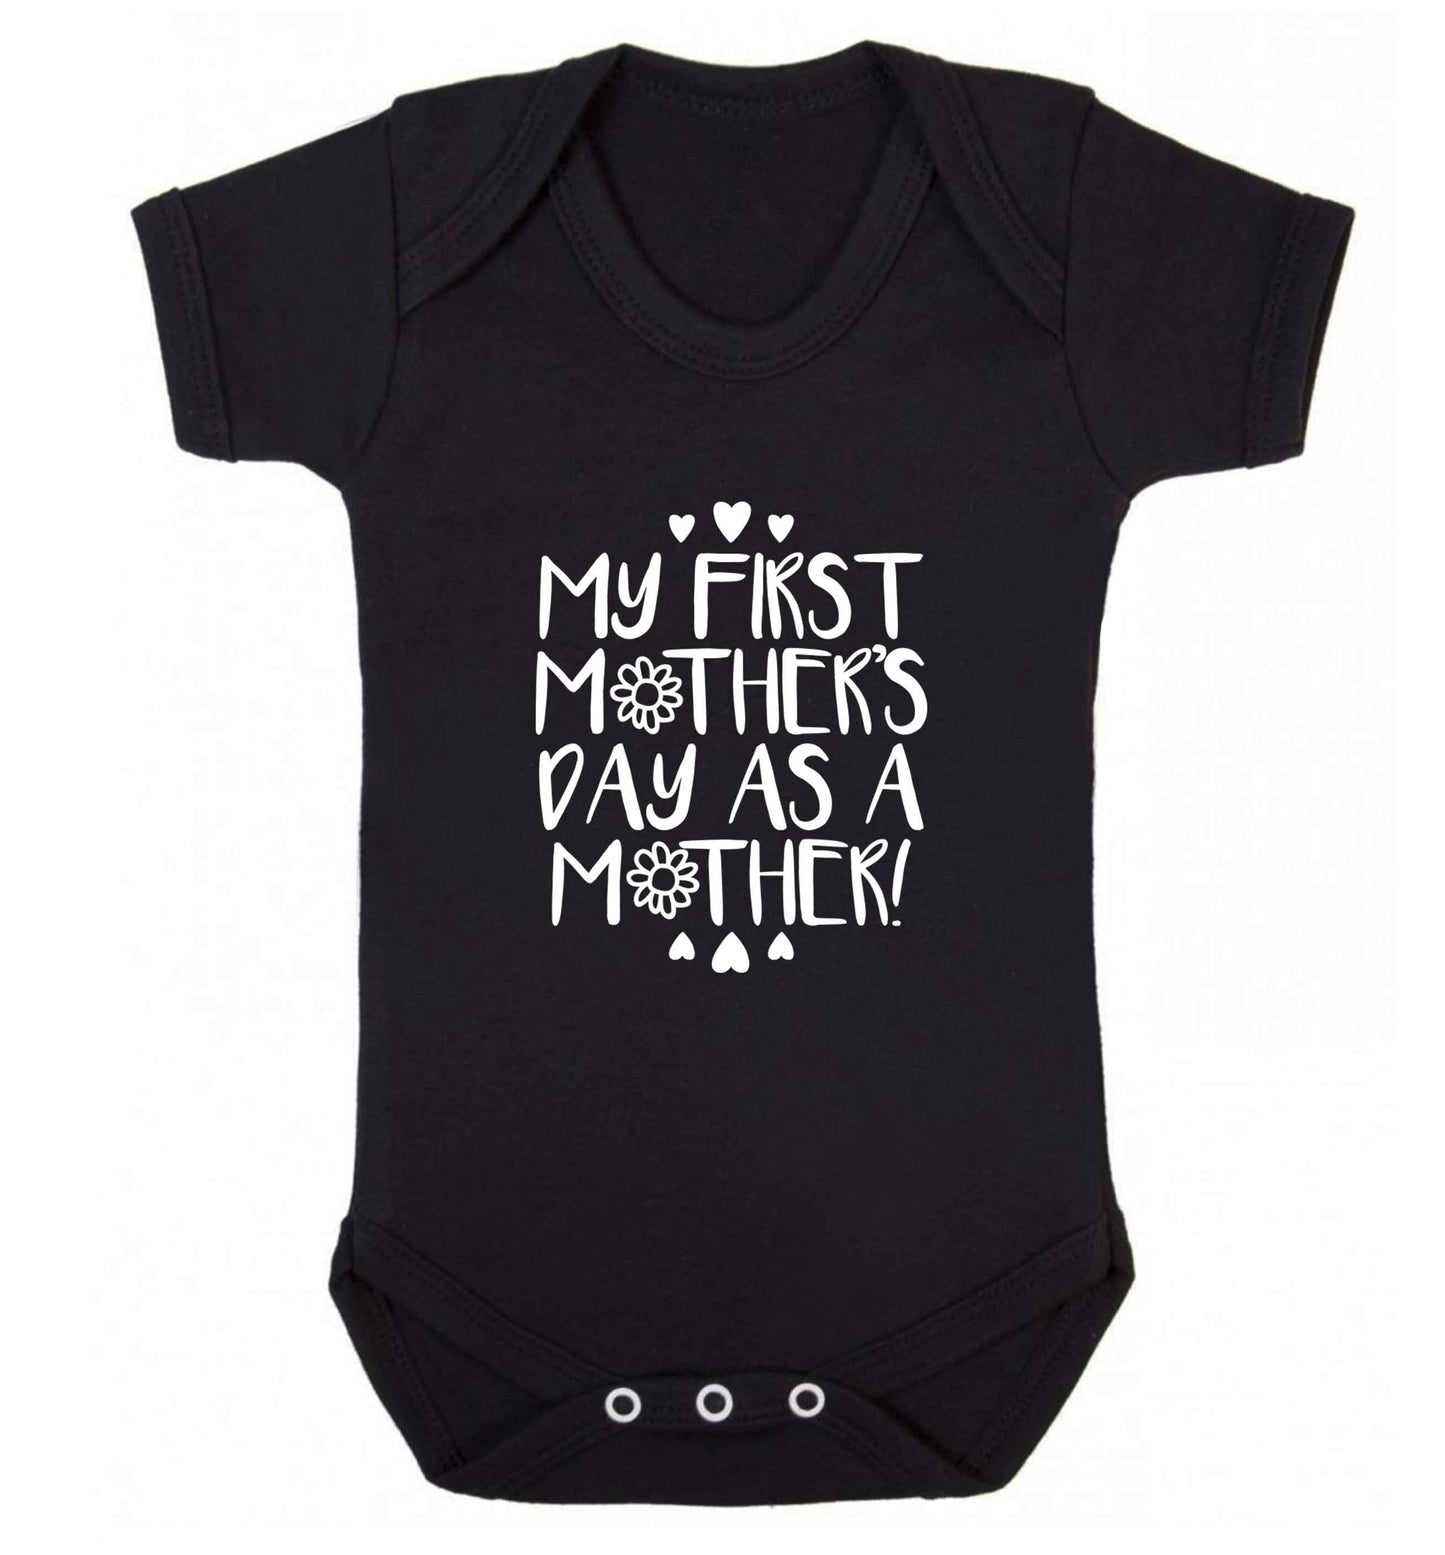 It's my first mother's day as a mother baby vest black 18-24 months